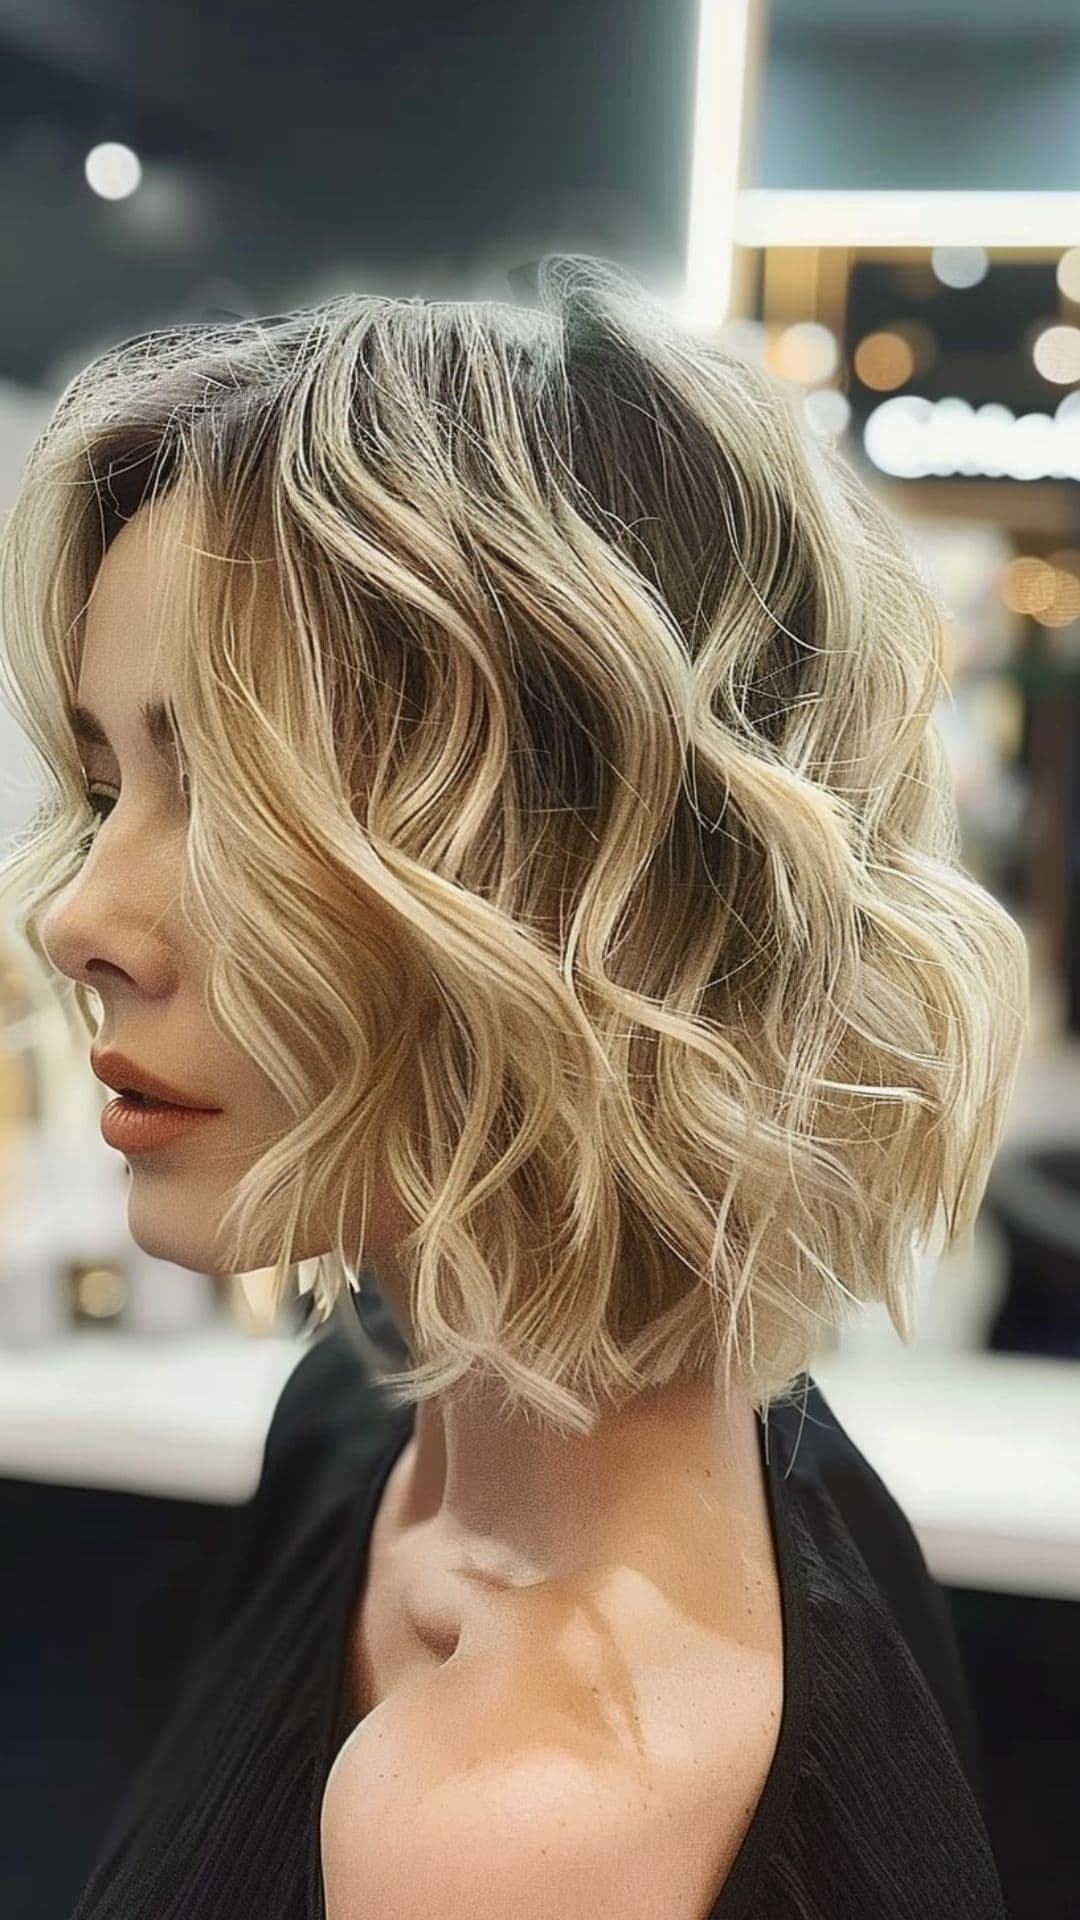 A woman modelling a blunt bob with volume curls.